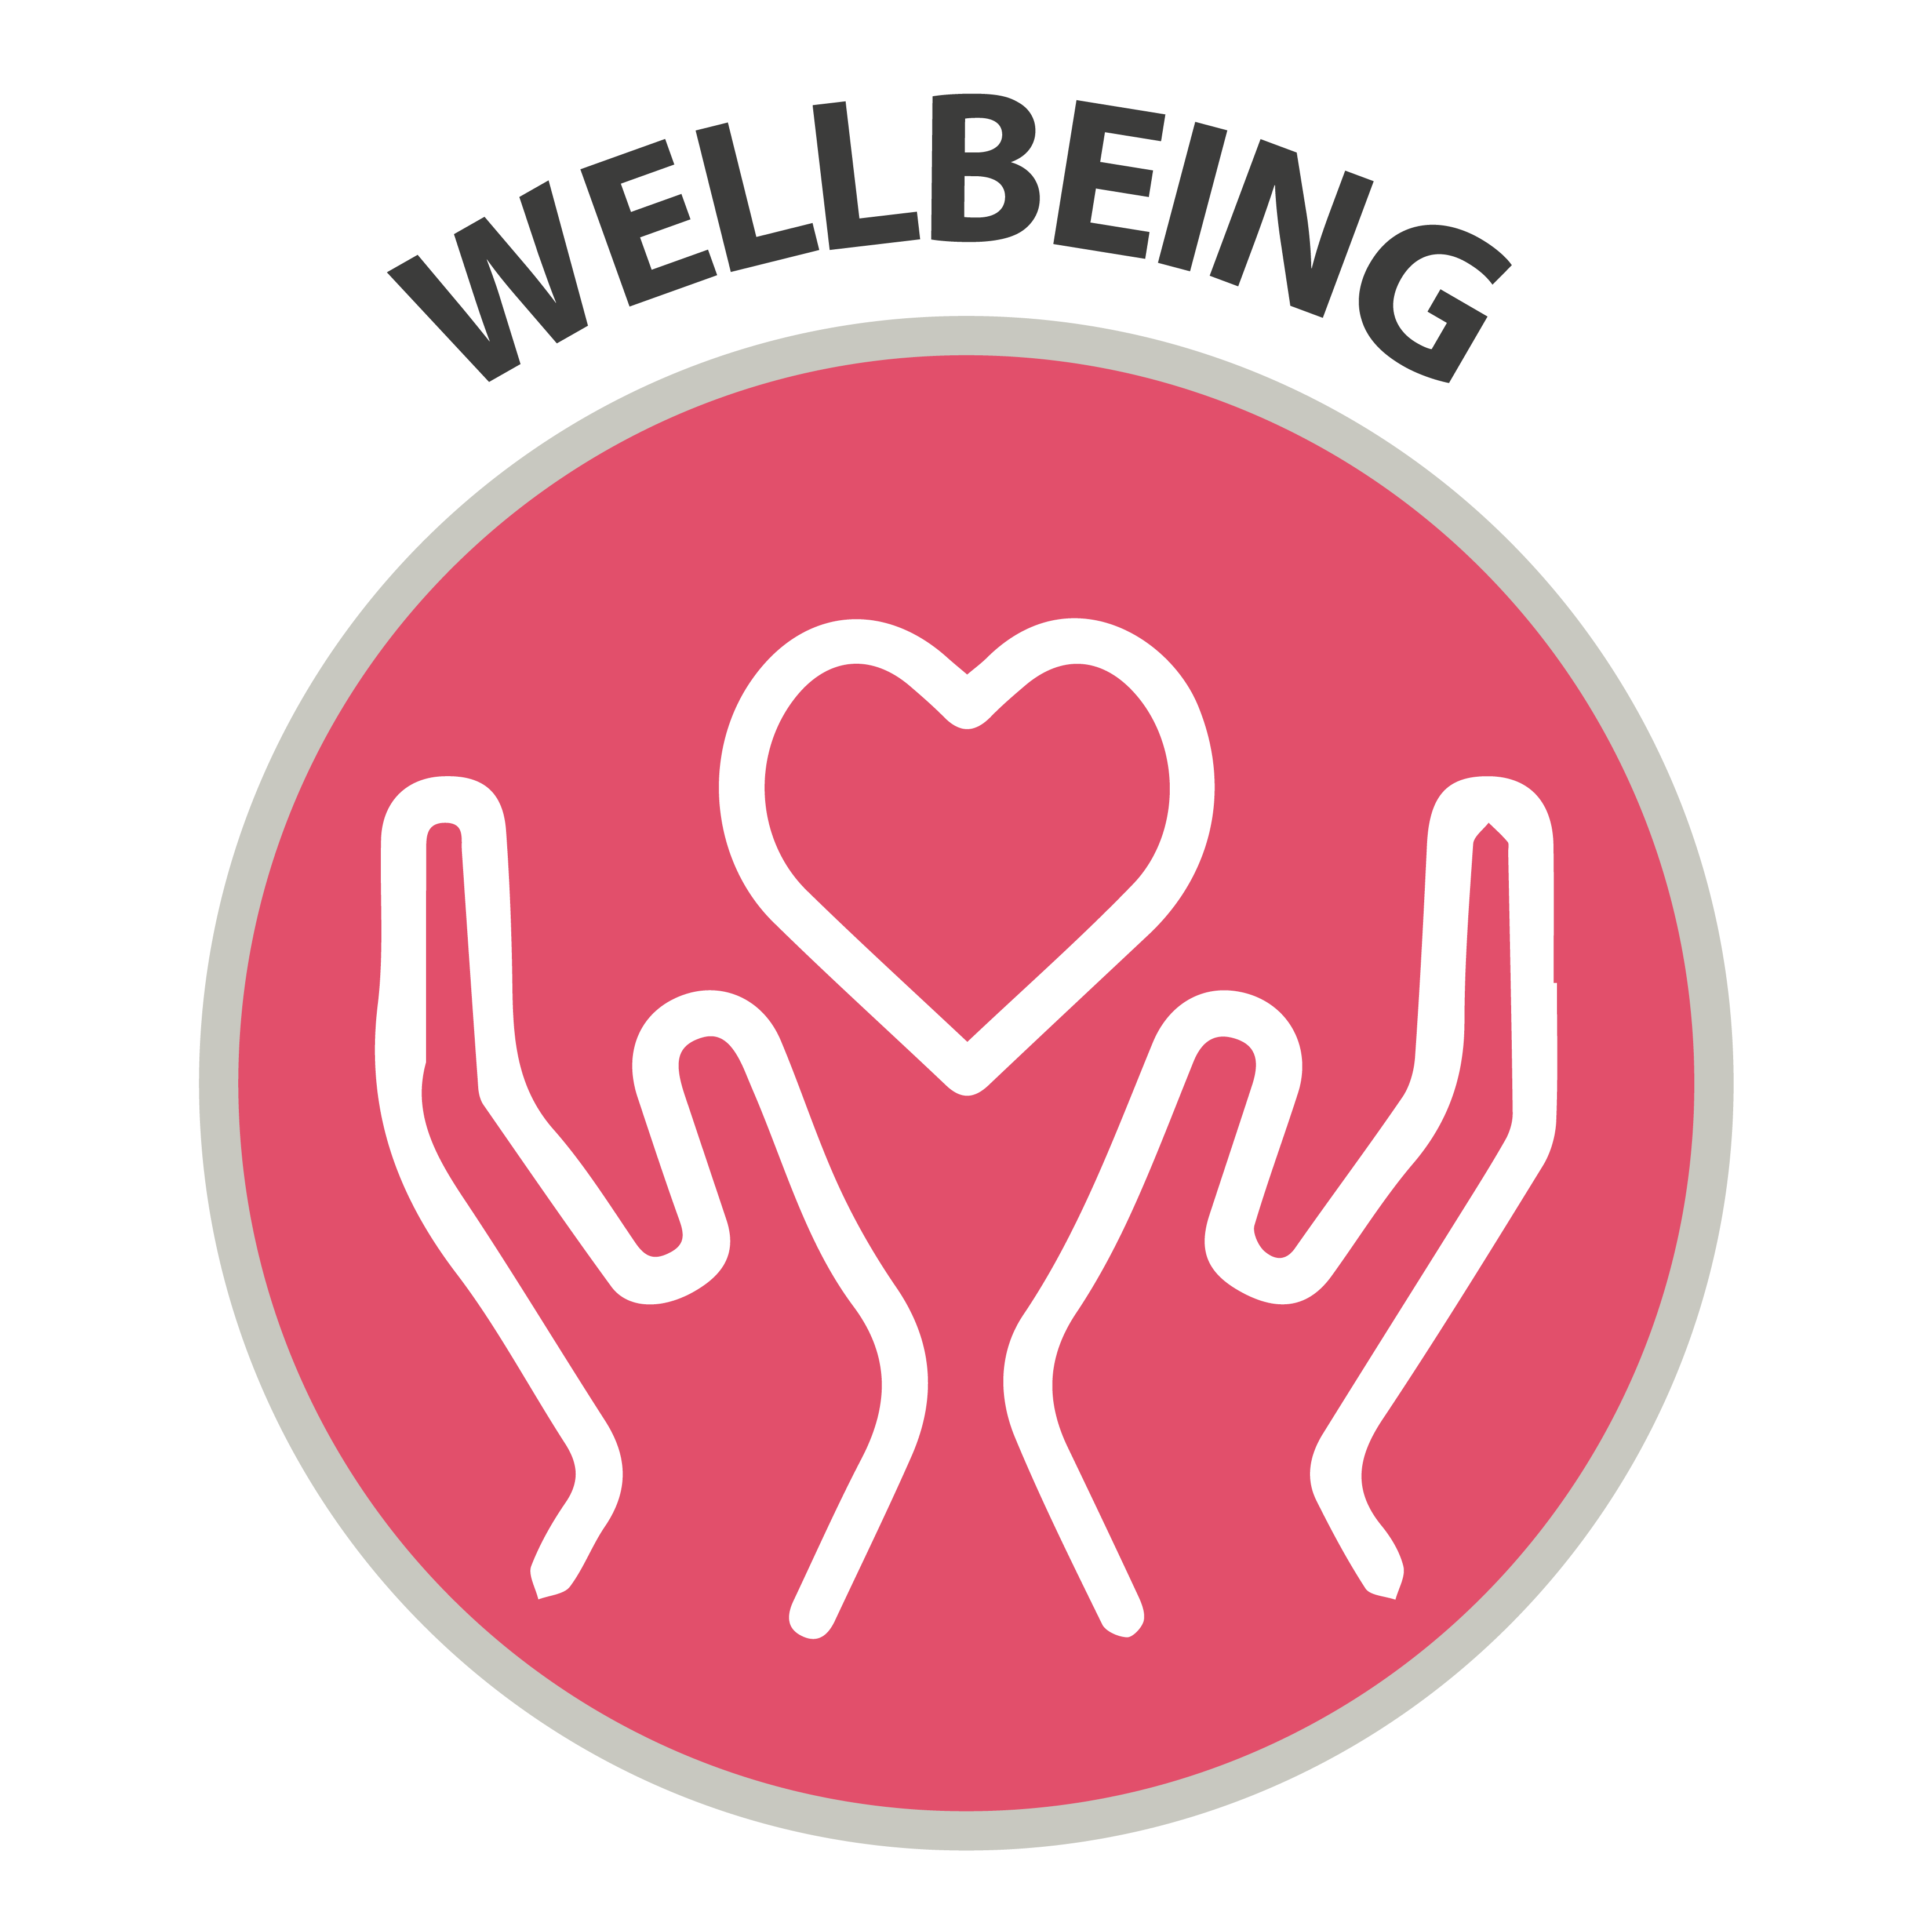 Wellbeing - icon of open hands and heart symbol